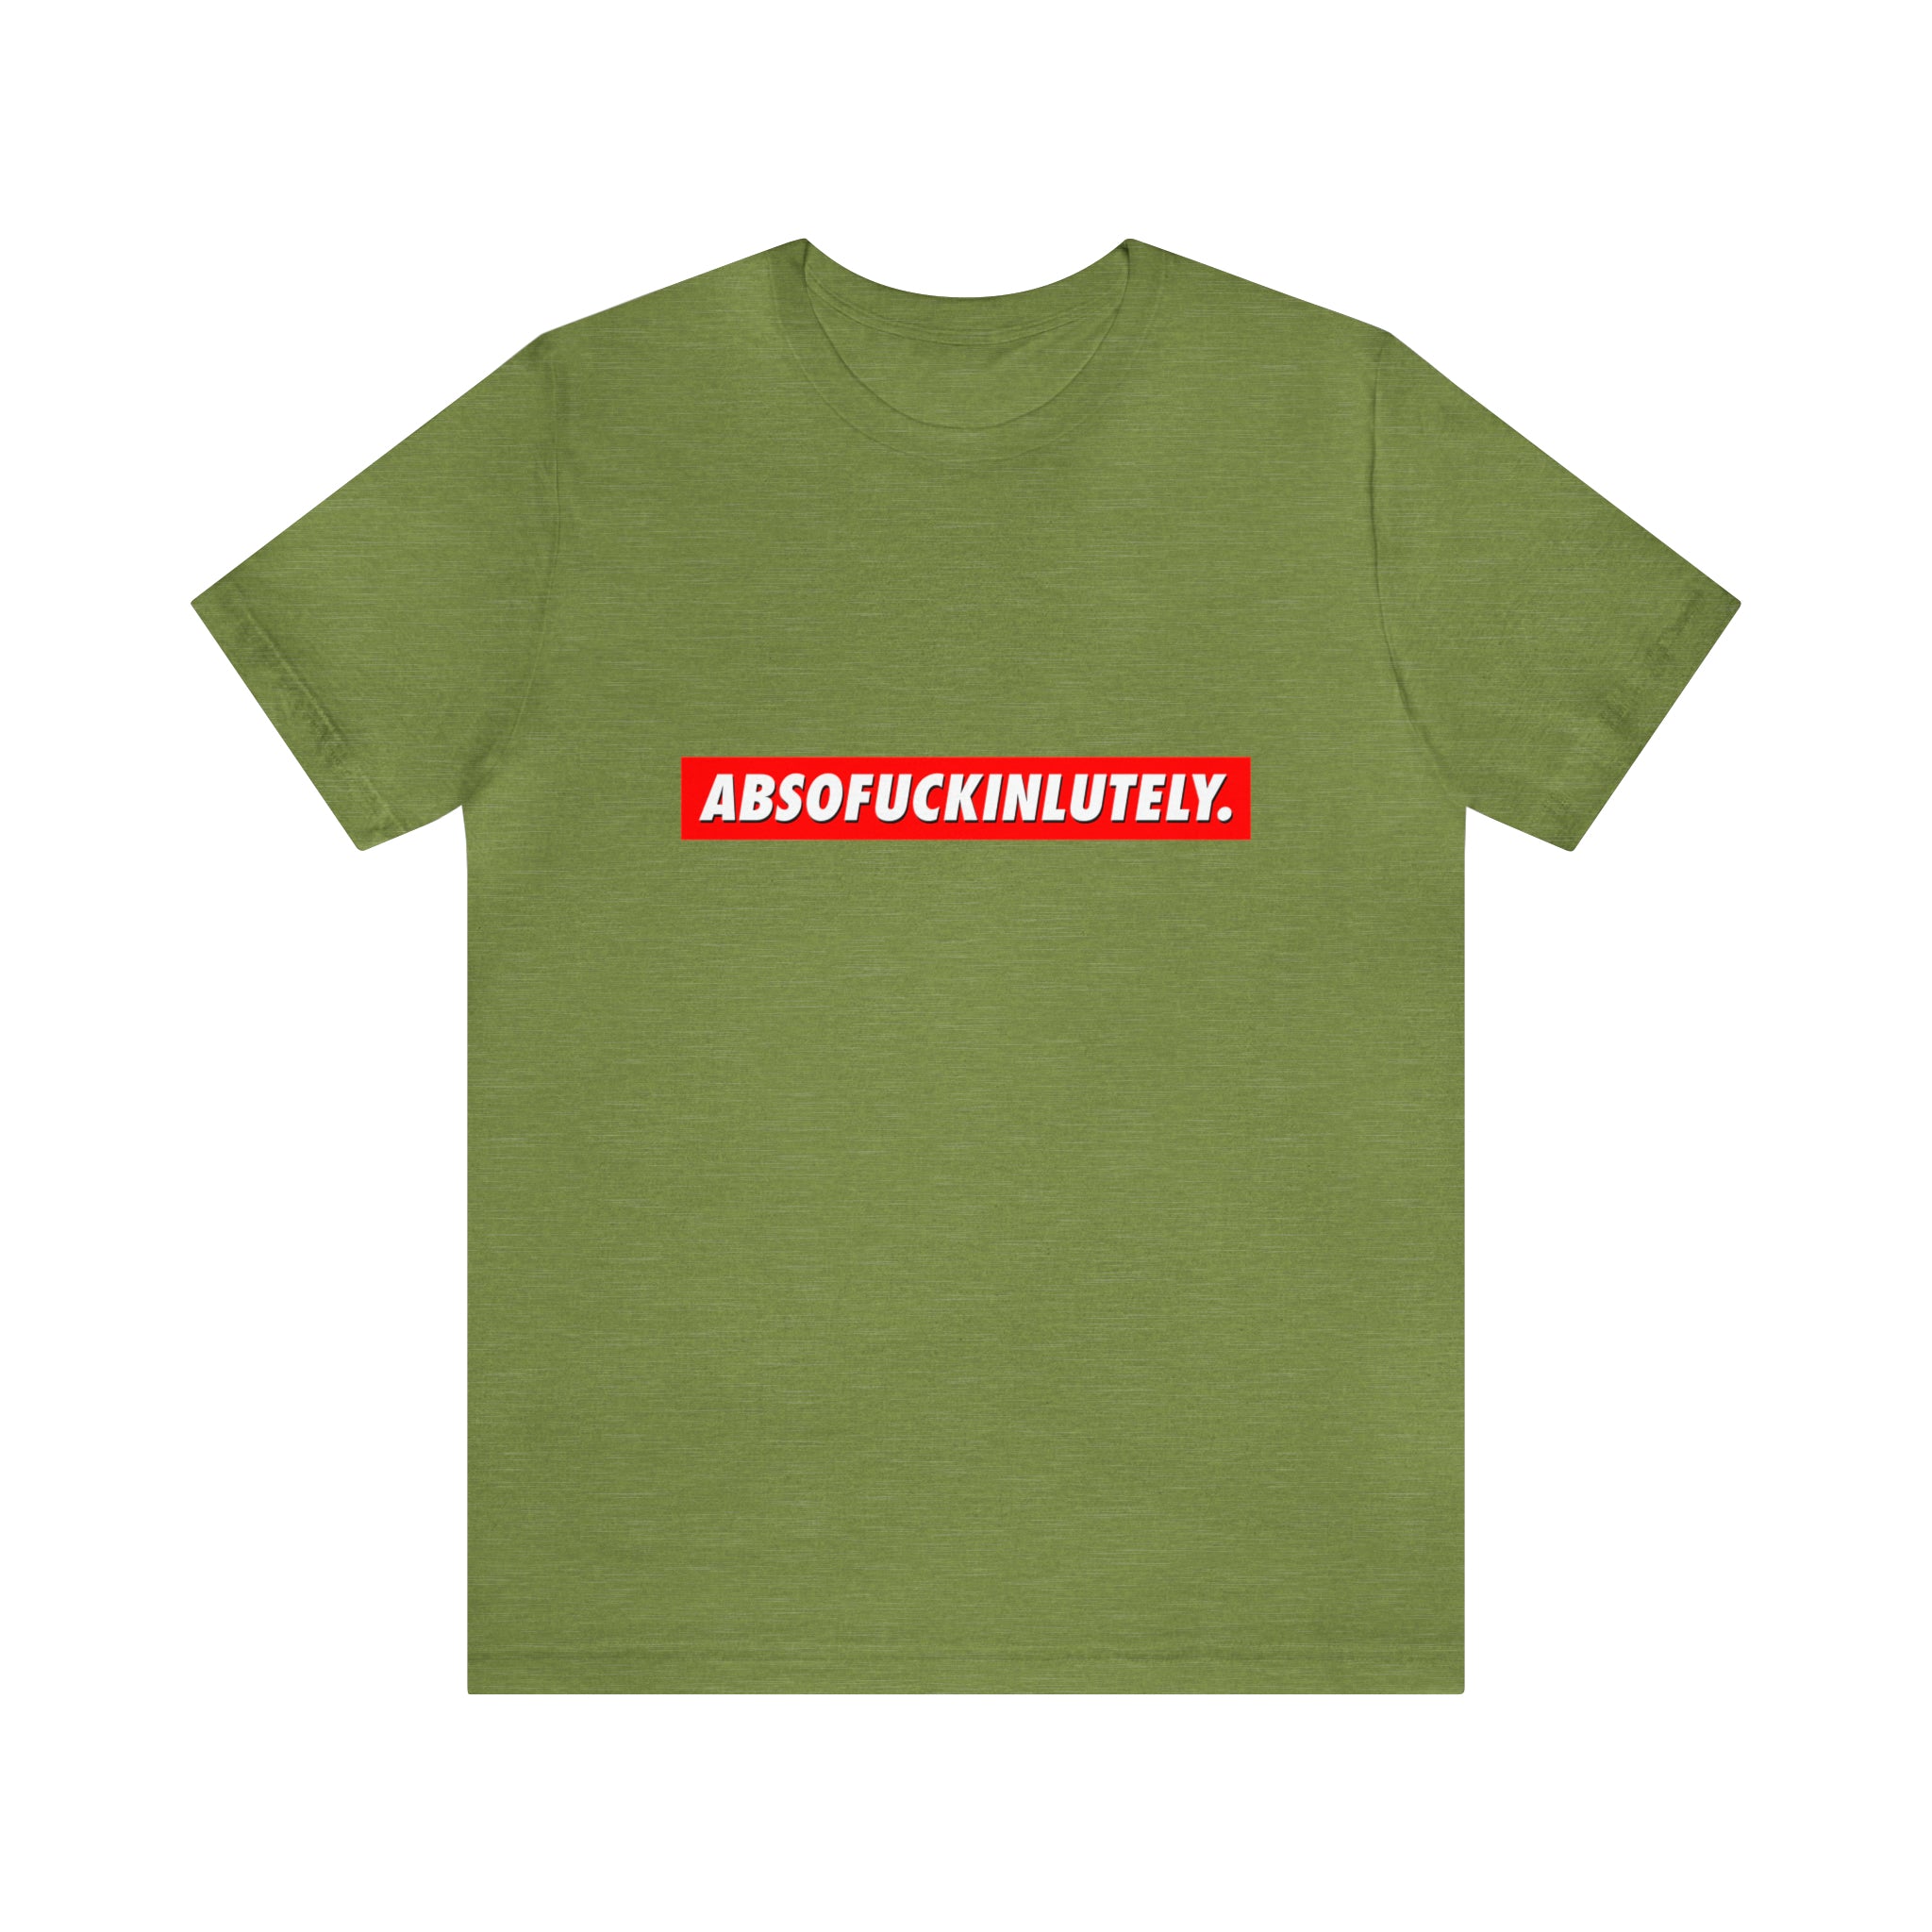 A bold Absofuckinlutely T-Shirt with a red logo.